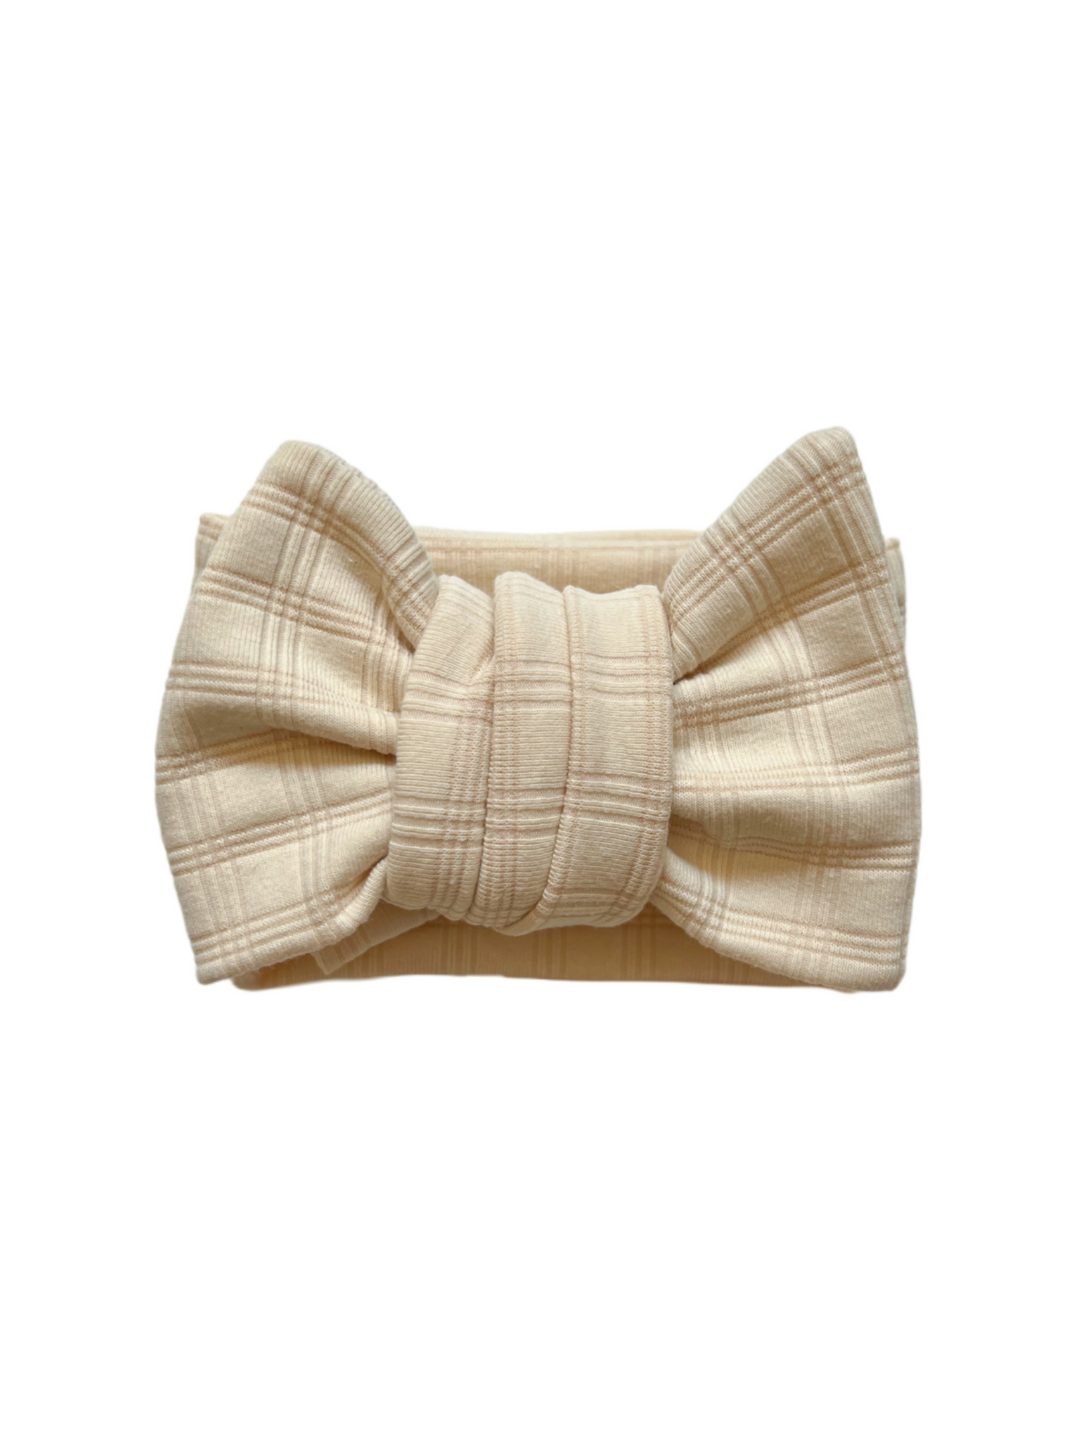 Oversized Checkered Knit Bow - Cream